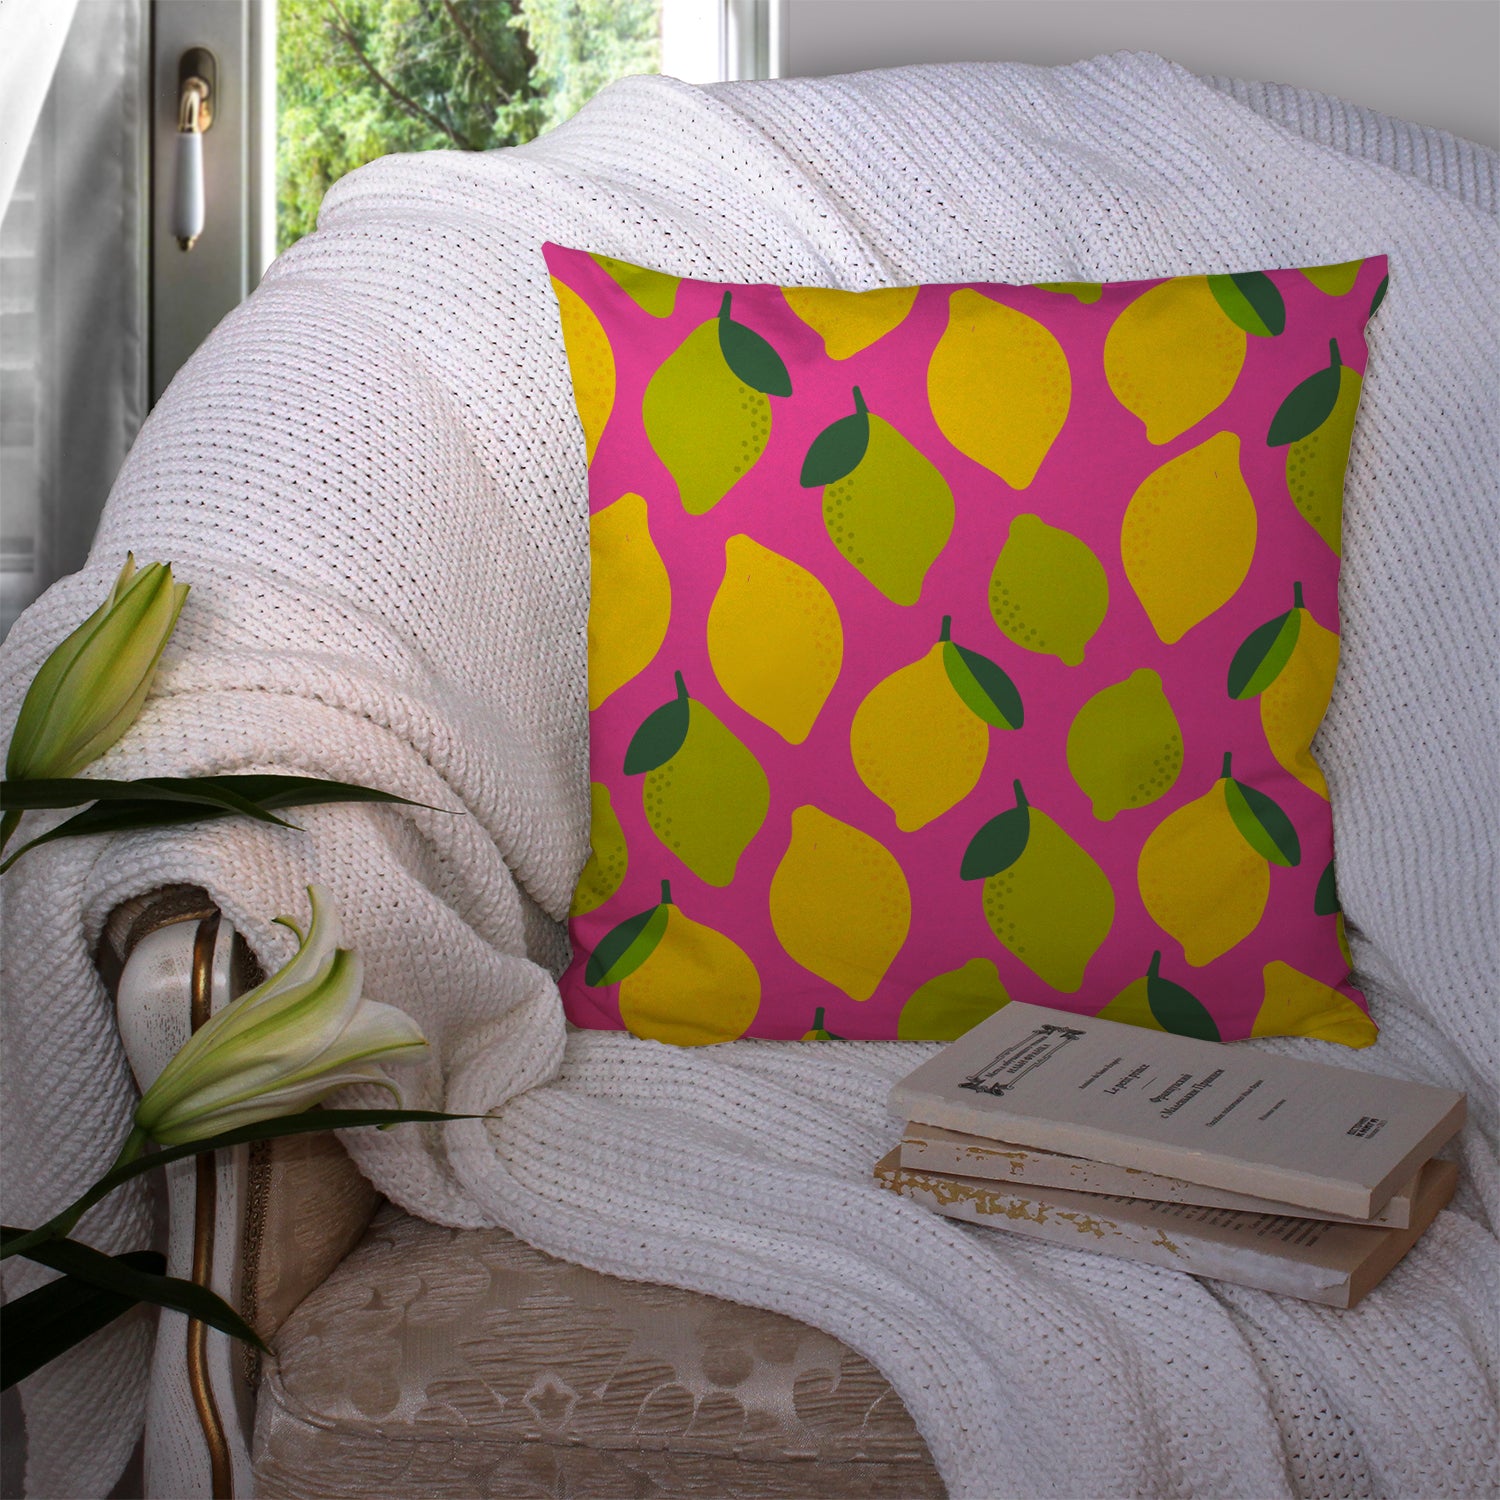 Lemons and Limes on Pink Fabric Decorative Pillow BB5143PW1414 - the-store.com